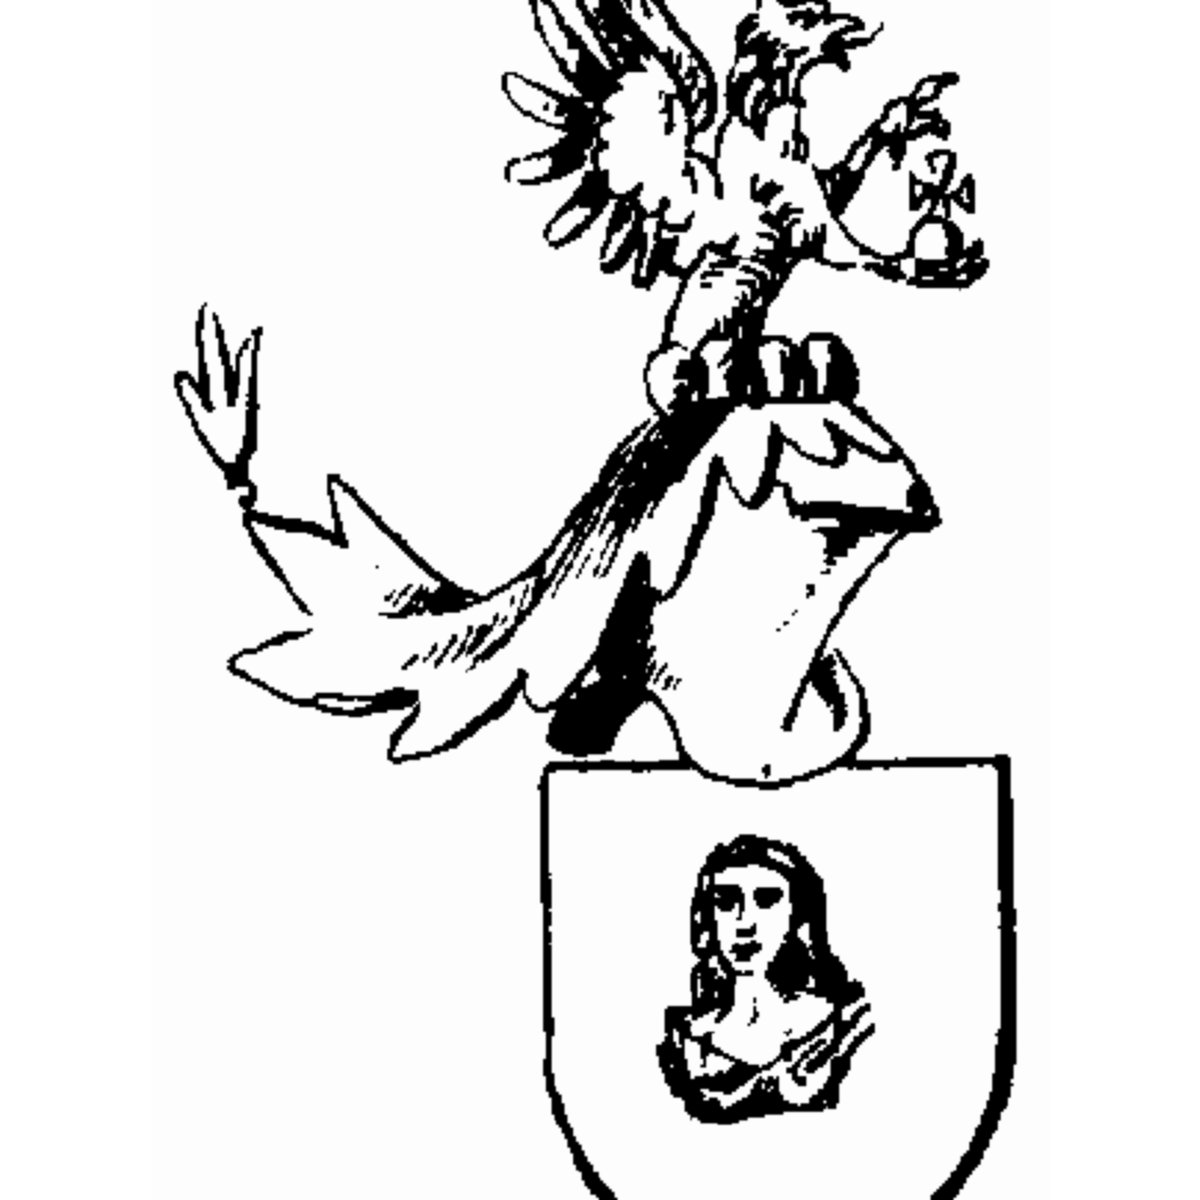 Coat of arms of family Rollin